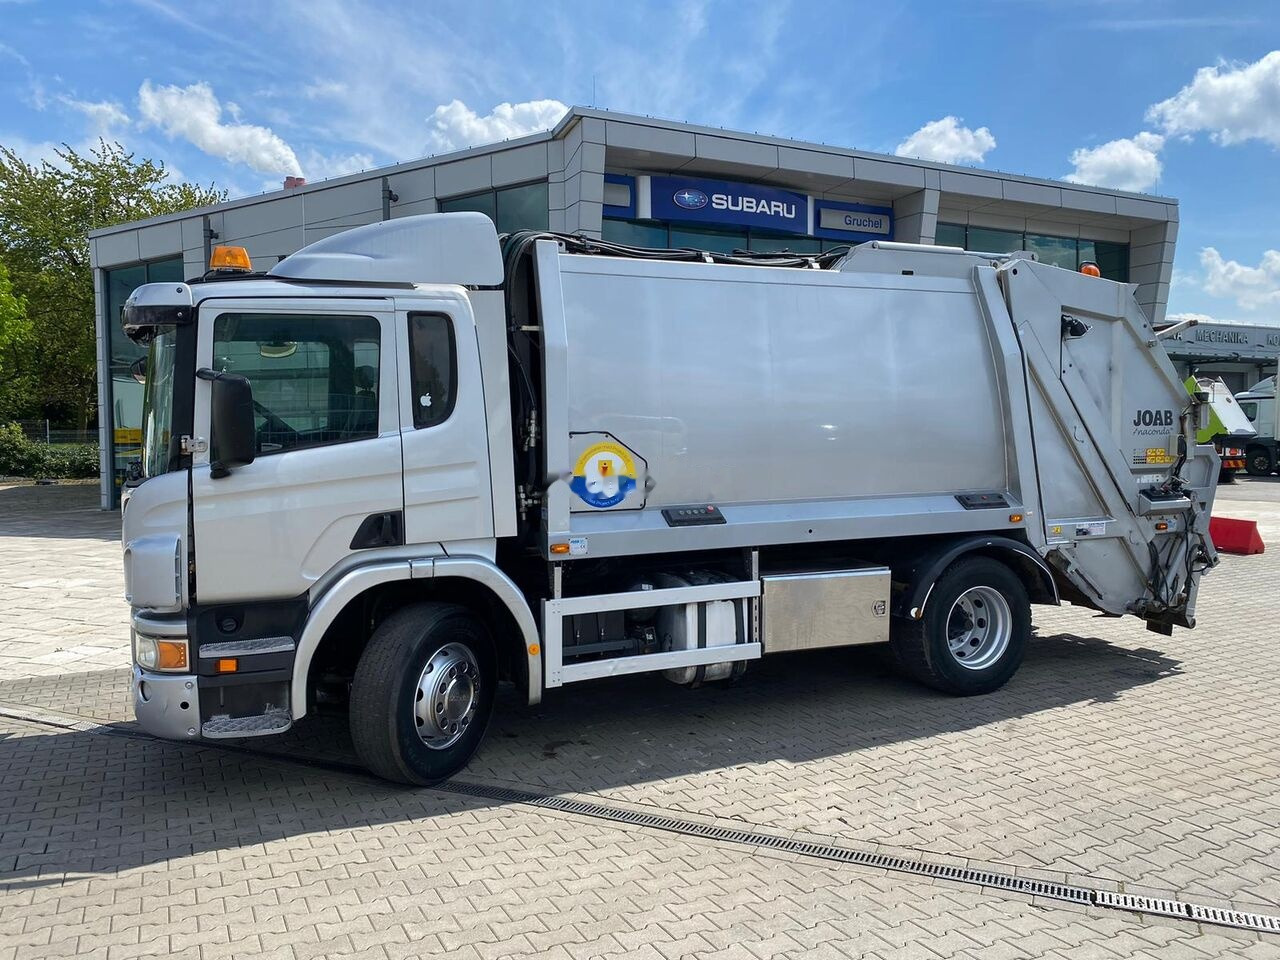 Scania P230DB / JOAB ANACONDA TWIN 13.3m3 / 1 OWNER / FULL SERVICED leasing Scania P230DB / JOAB ANACONDA TWIN 13.3m3 / 1 OWNER / FULL SERVICED: picture 15